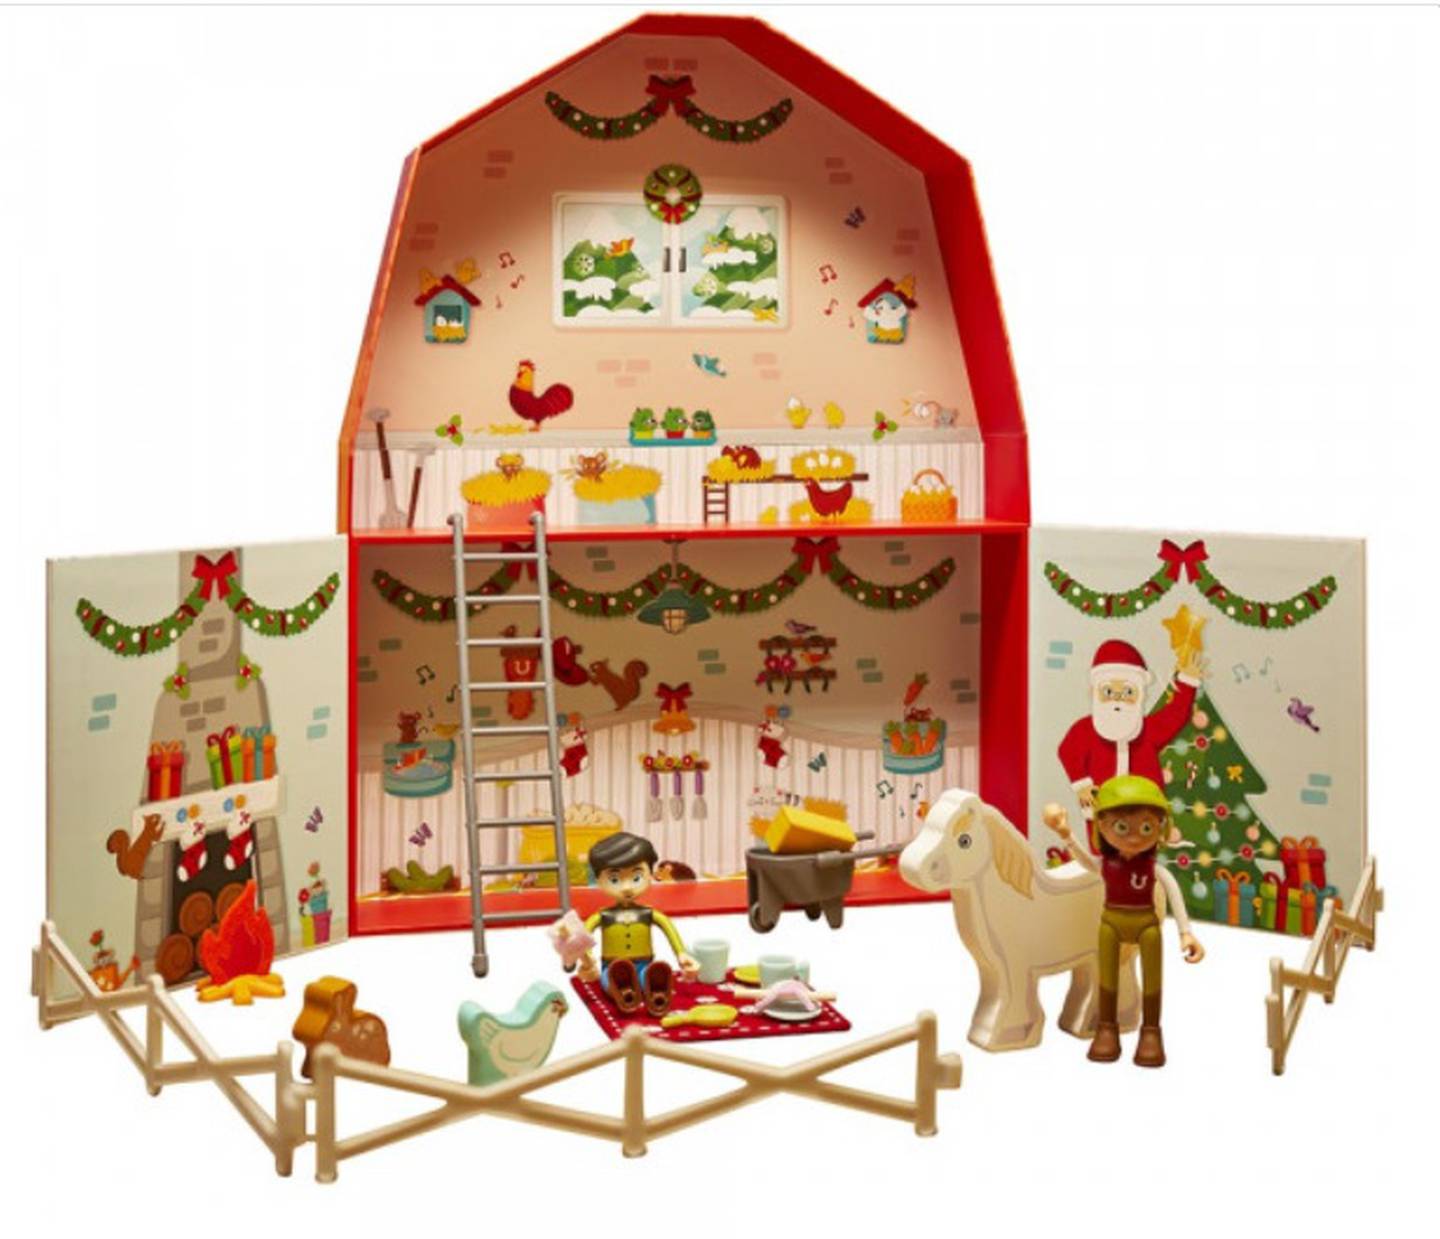 This Advent calendar doubles up as a farmyard toy when all the doors have been opened. Photo: Hape